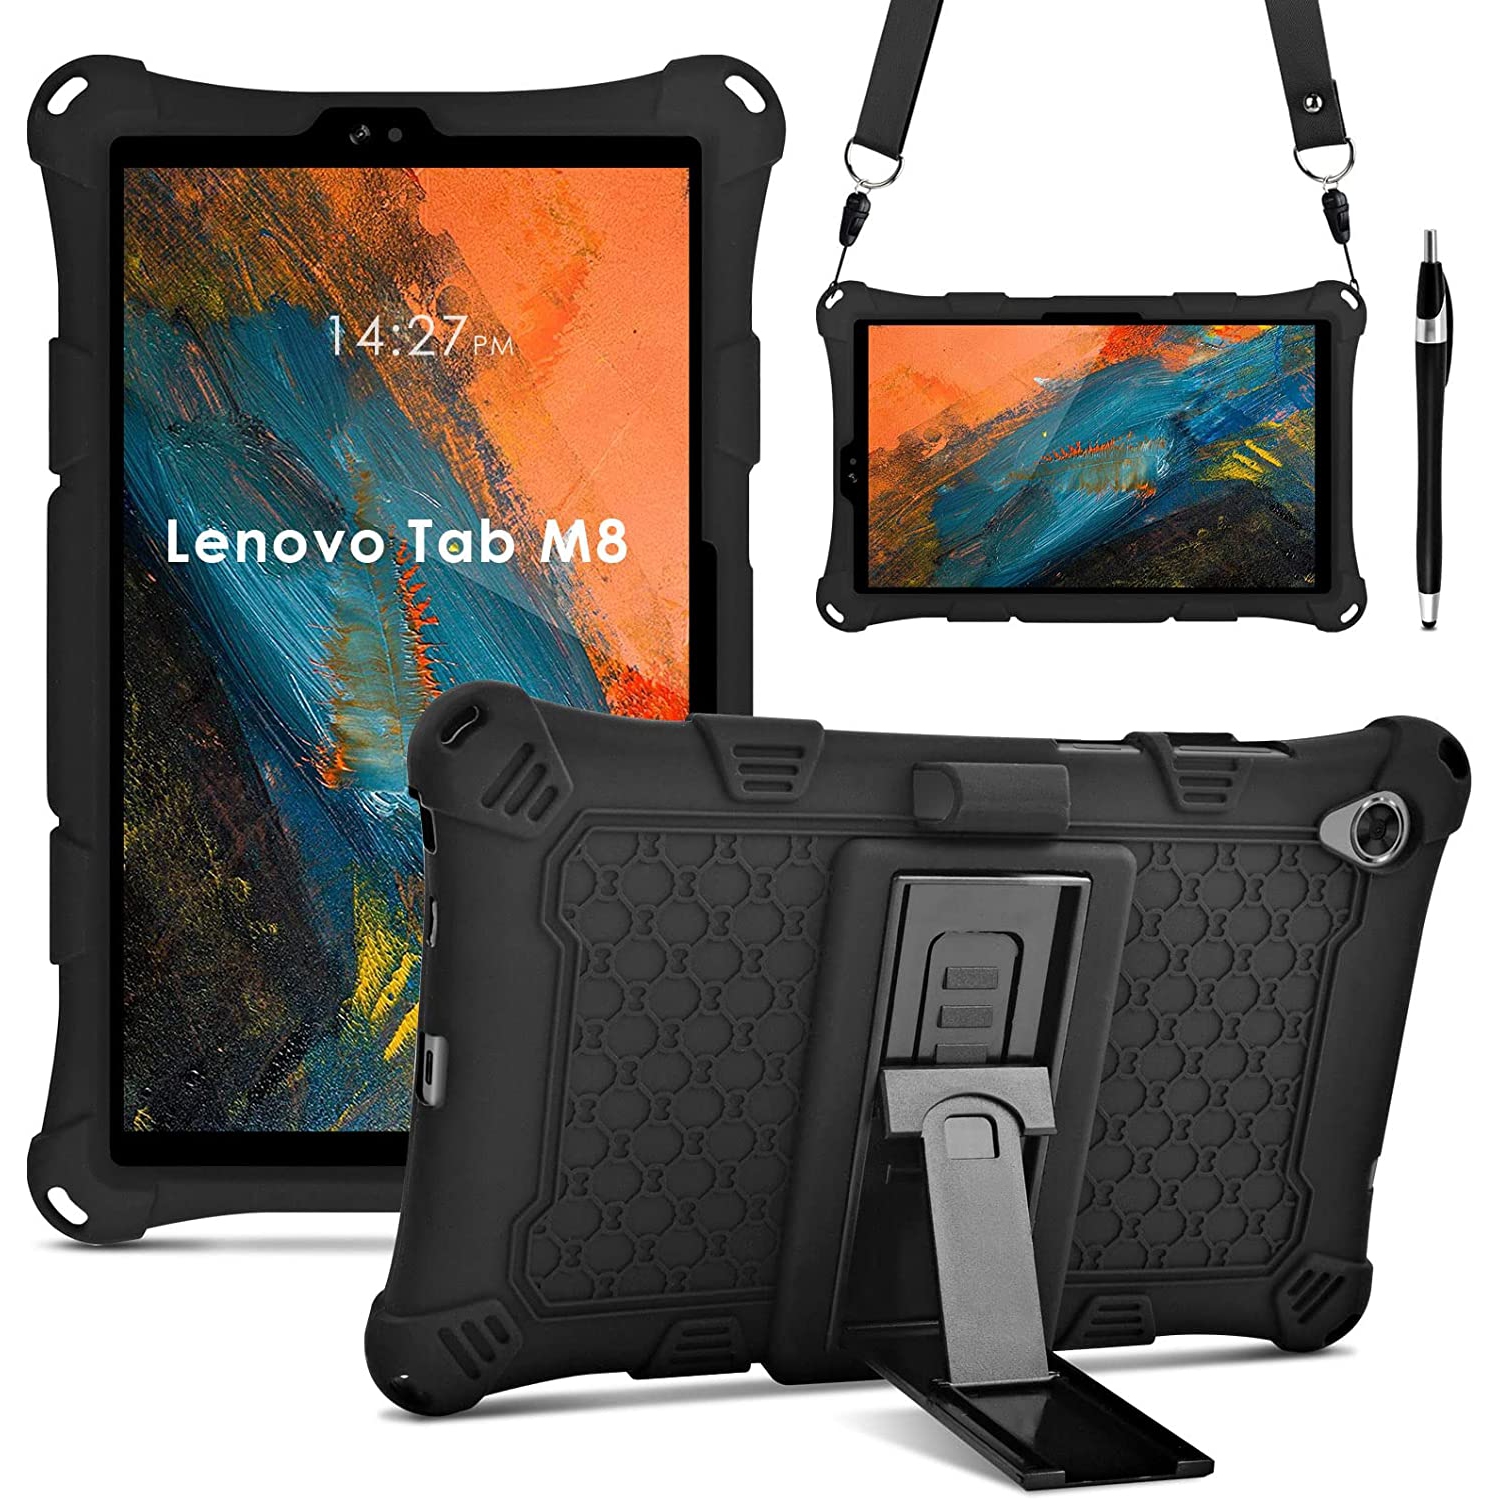 D Case Compatible with Lenovo Tab FHD TB-8705F/Lenovo Tab M8 HD TB-8505F [Include Strap & Stylus], Soft Silicone Protective Cover with Stand for Lenovo M8 3rd Gen TB-8506, Black